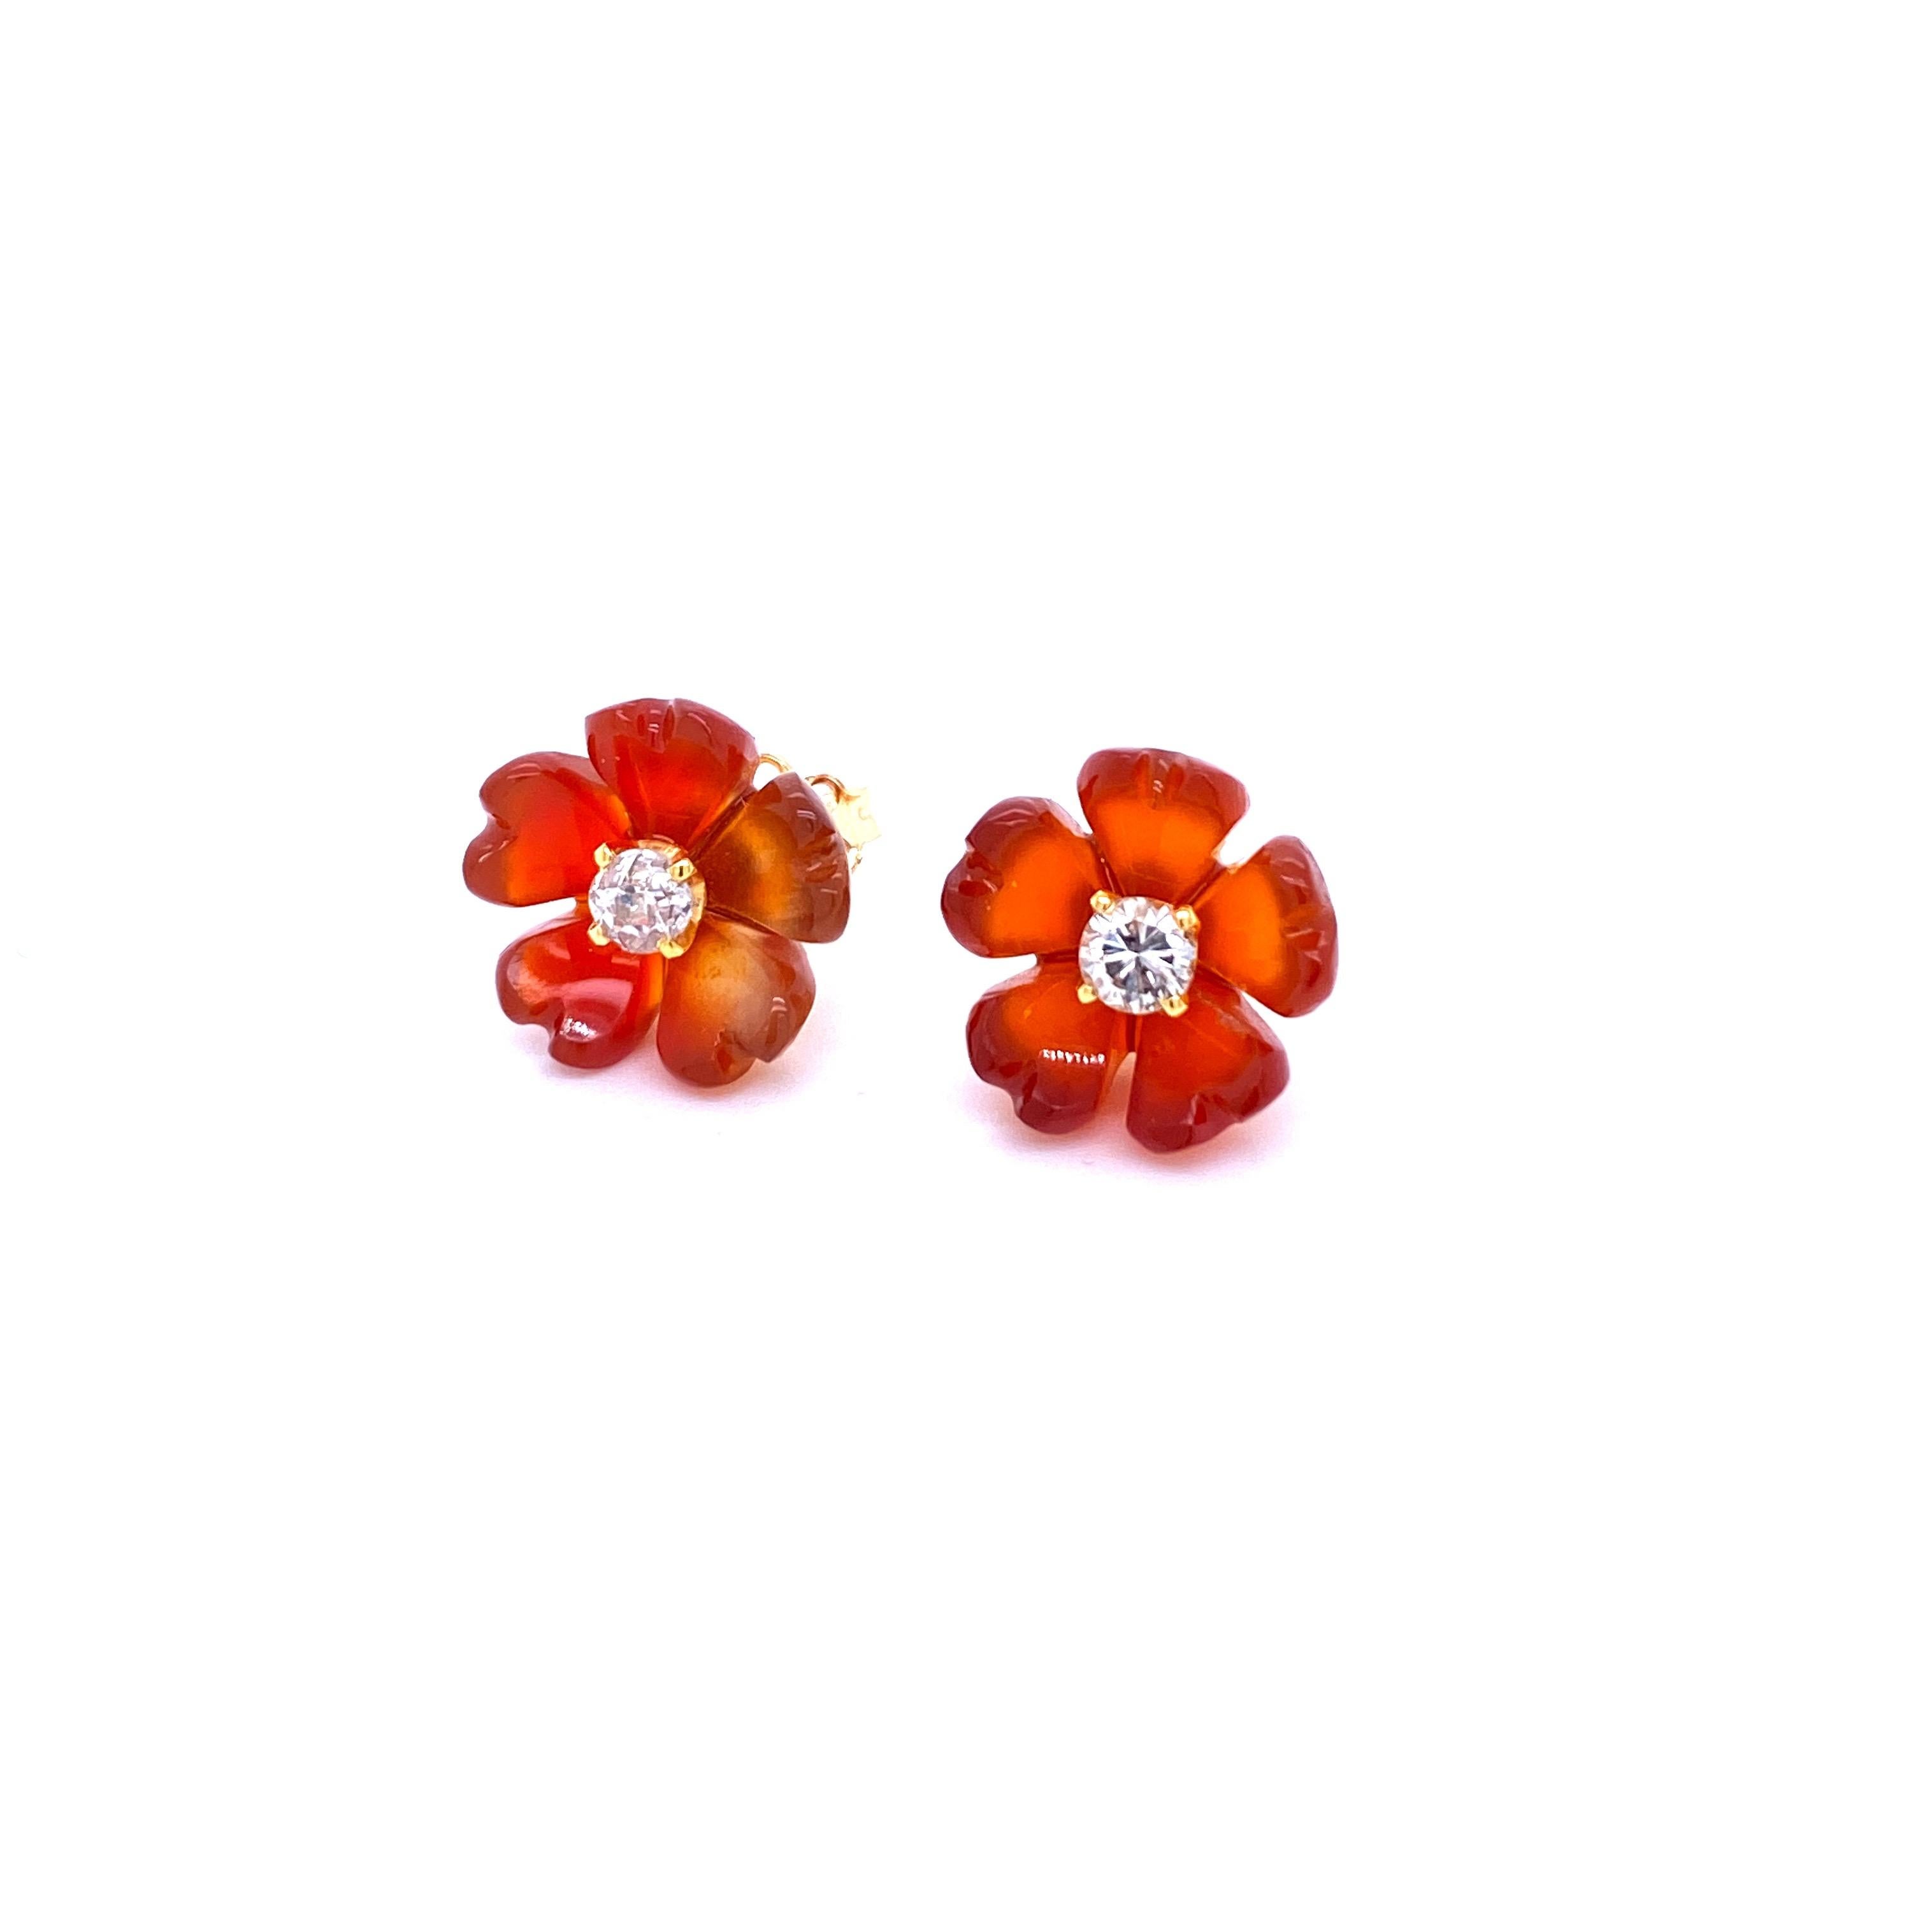 An unusual pair of vintage diamond flower design earrings set in 18k Gold and hand-carved Carnelian. They are set with two large Round brilliant cut Diamonds in the center  for a total weight of 0.85 ct. All graded color G clarity Vvs2. 
Origin